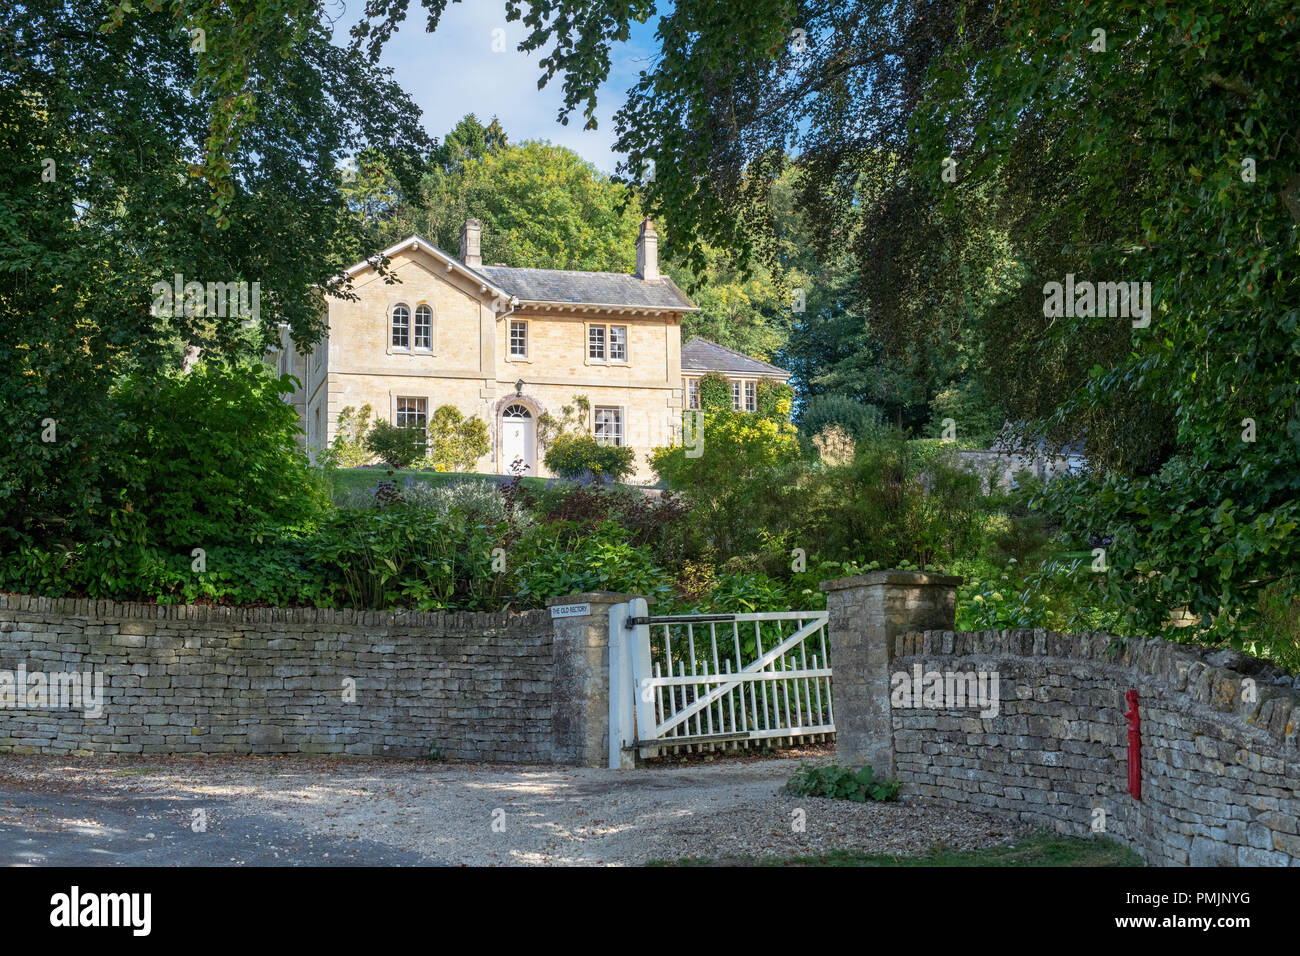 The old rectory in the cotswold village of Bagendon, Cotswolds, Gloucestershire, England Stock Photo